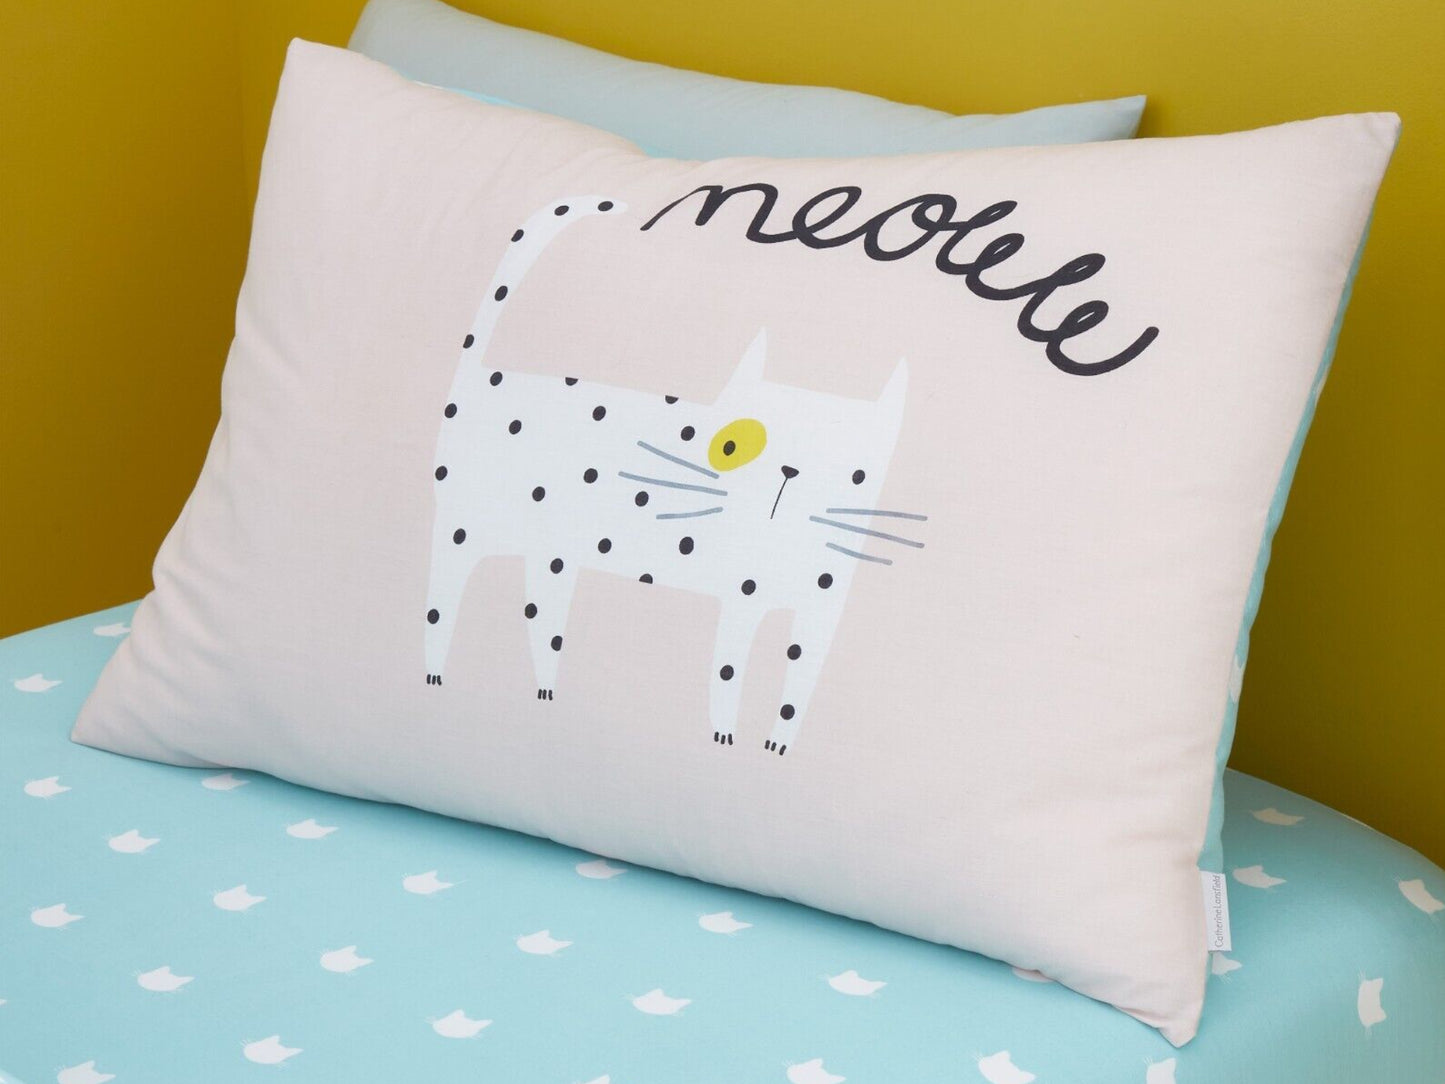 Cute Cats Bedding Set by Catherine Lansfield